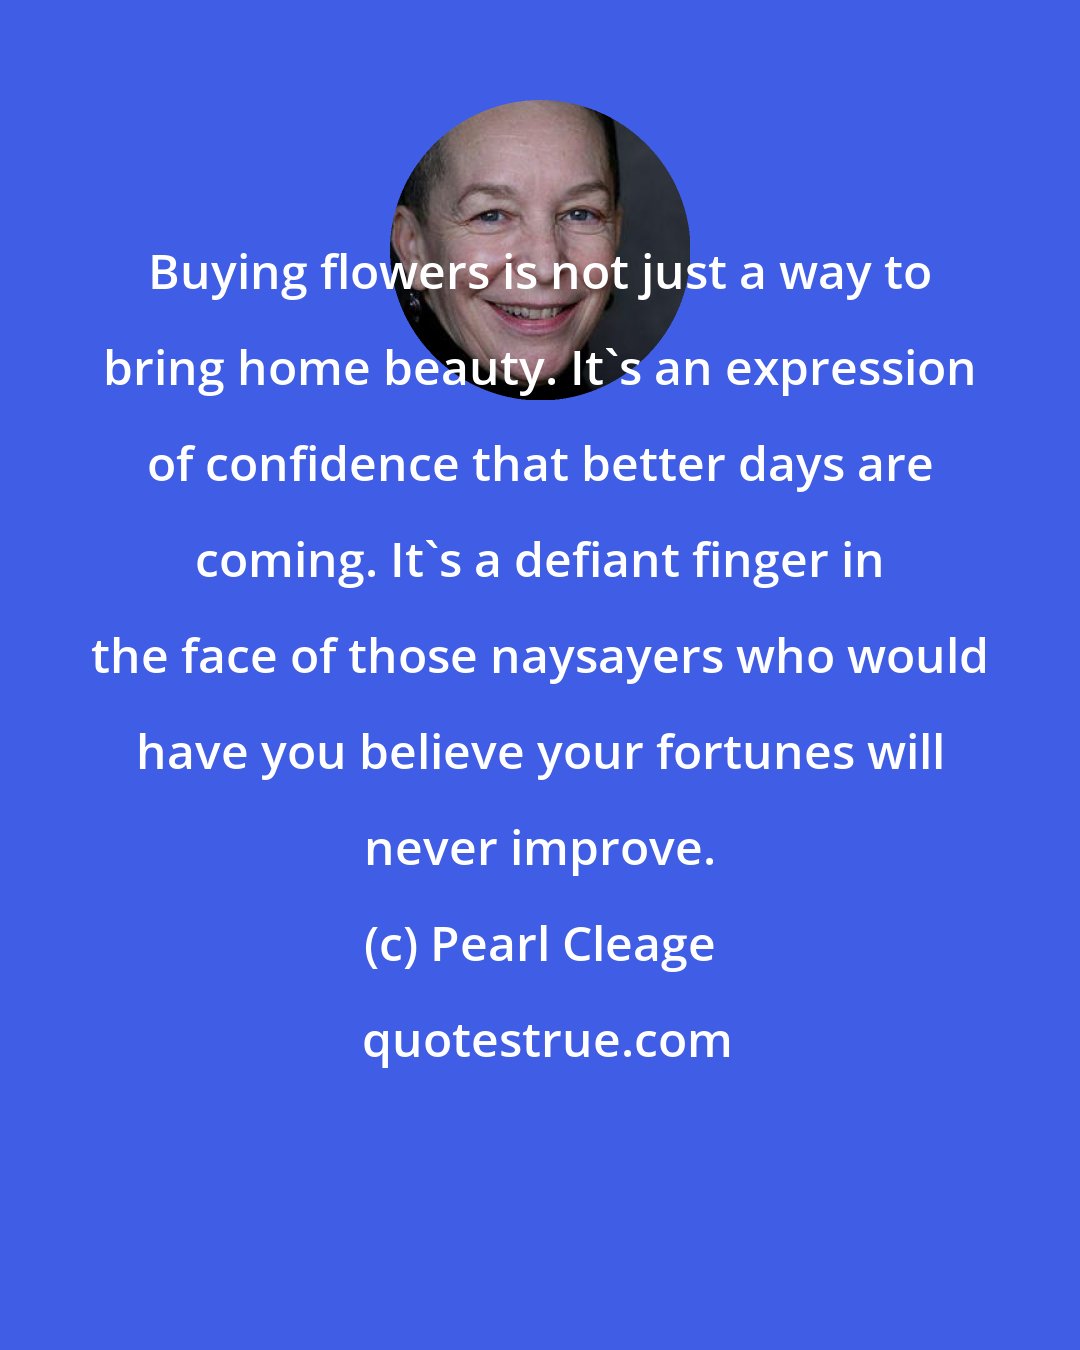 Pearl Cleage: Buying flowers is not just a way to bring home beauty. It's an expression of confidence that better days are coming. It's a defiant finger in the face of those naysayers who would have you believe your fortunes will never improve.